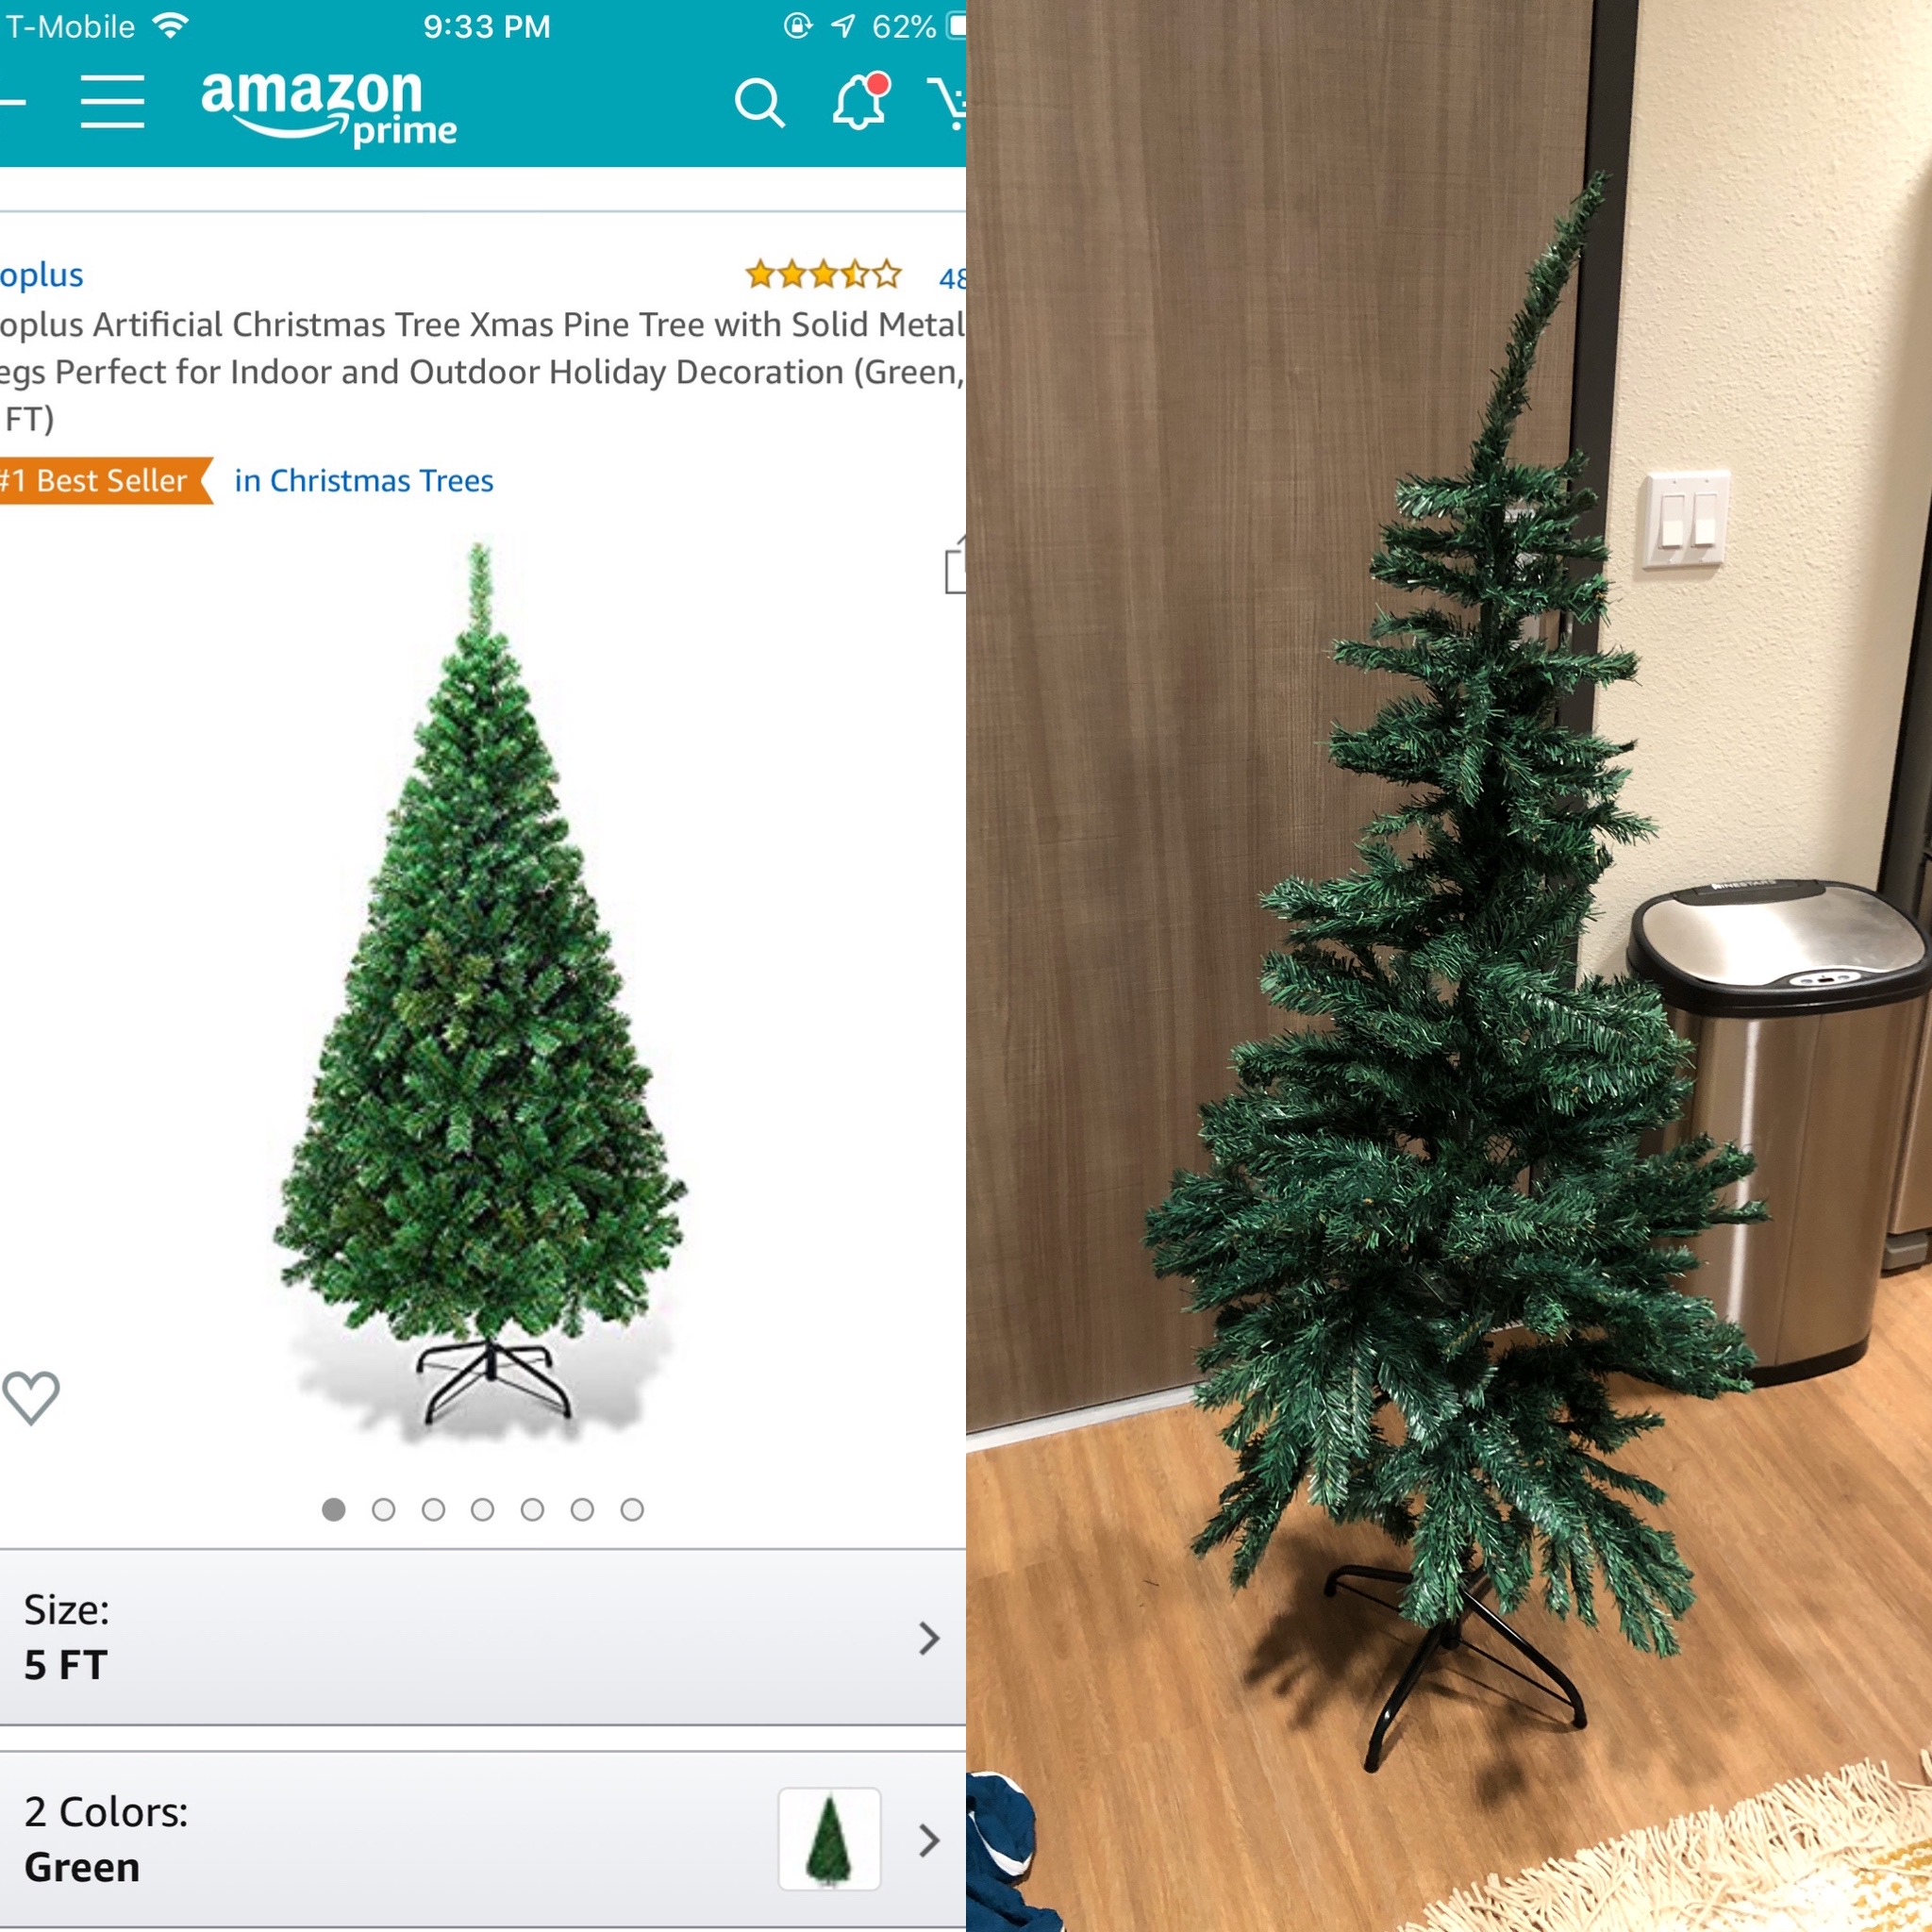 christmas tree - TMobile @ 462X amazone oplus oplus Artificial Christmas Tree Xmas Pine Tree with Solid Metal ags Perfect for Indoor and Outdoor Holiday Decoration Green, Ft Best Seller in Christmas Trees .Oooooo Size 5 Ft 2 Colors Green